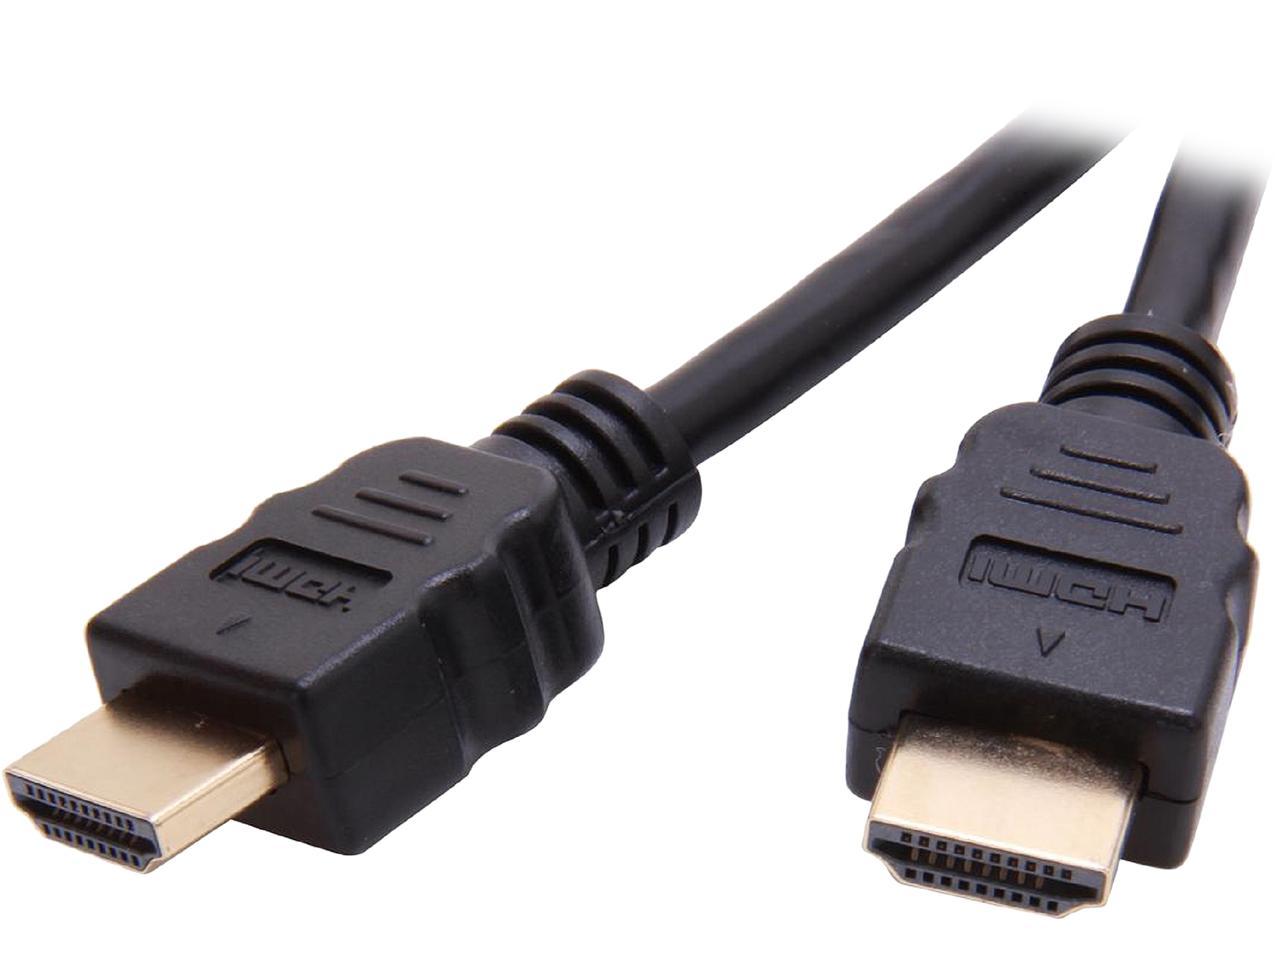 Ethernet DH Labs HDMI version 2.0  5 meter HDMI cable supports 3D 4K 18Gbps + 